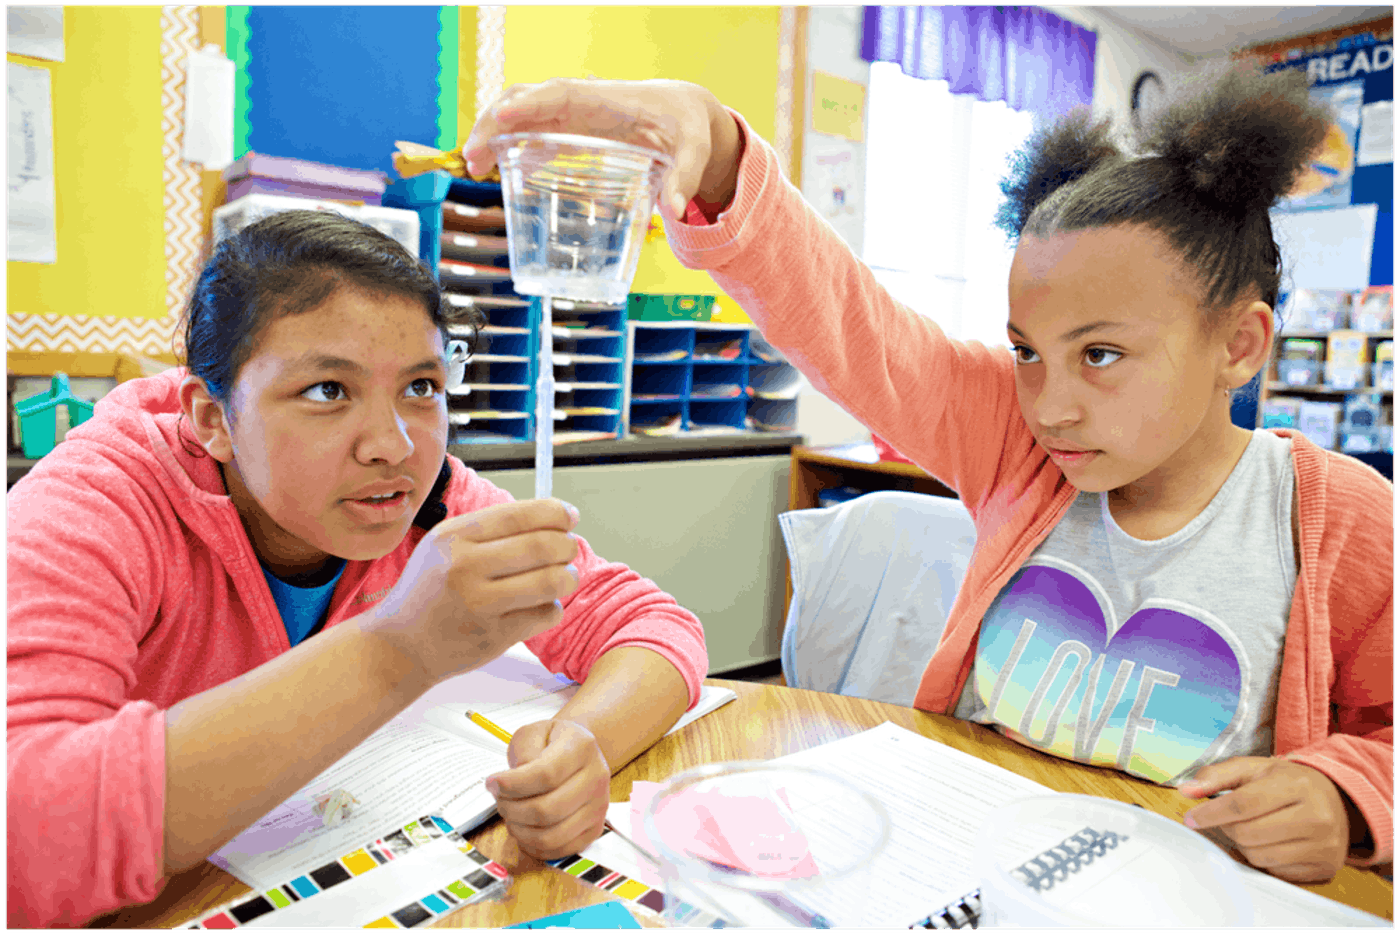 Two students engage in a science experiment in a classroom, with one holding a cup of water and a stick while the other observes intently.